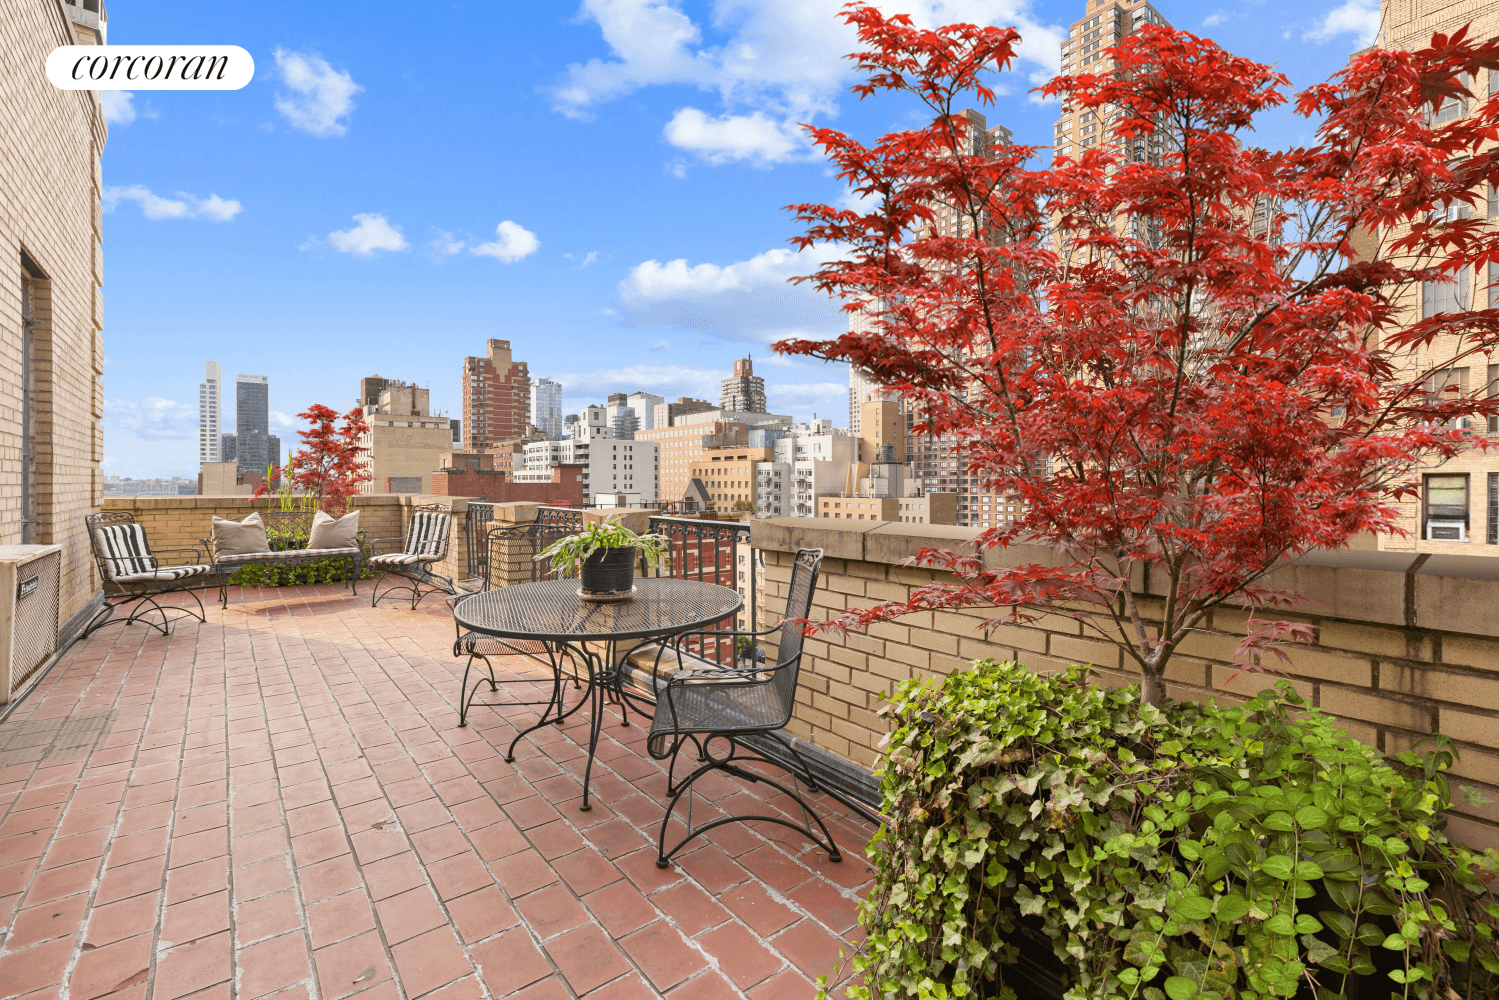 Welcome to The Parc Vendome, the elegant Pre War condominium at 353 West 56 Street.